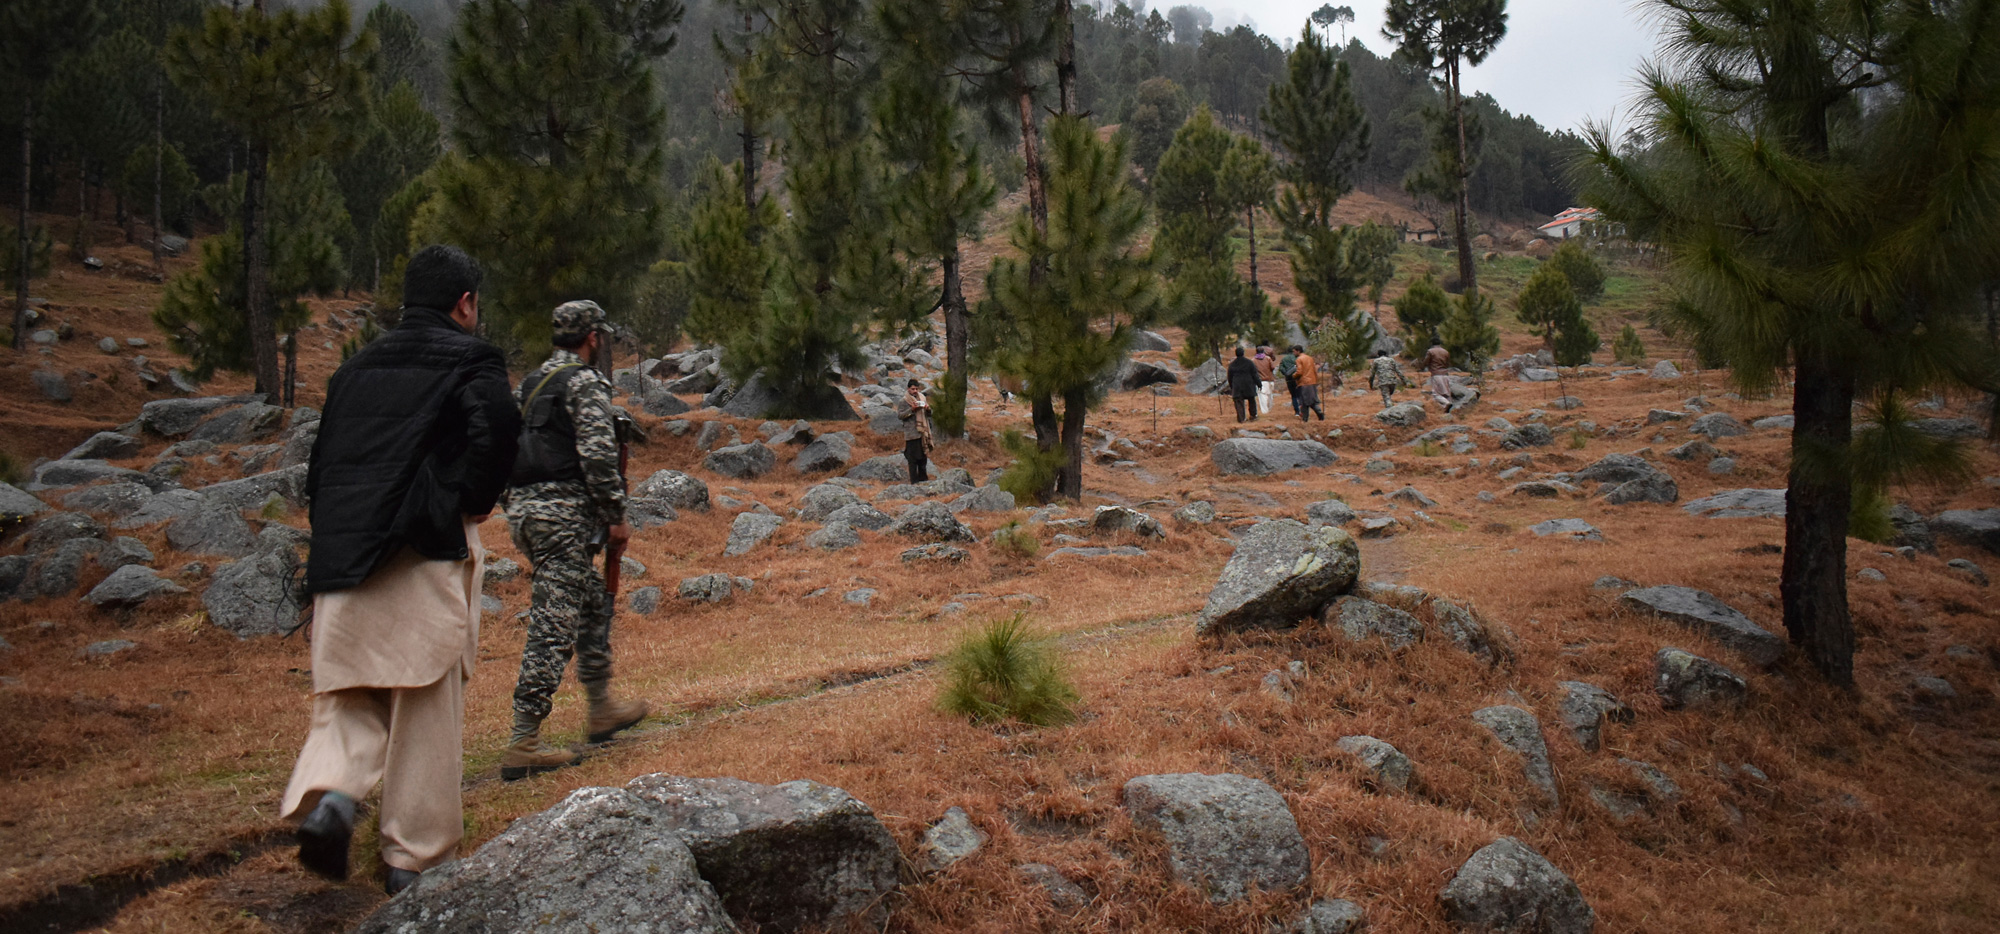 Pakistani reporters and troops visit the site of an Indian airstrike in Jaba, near Balakot, in Pakistan on Tuesday, February 26.